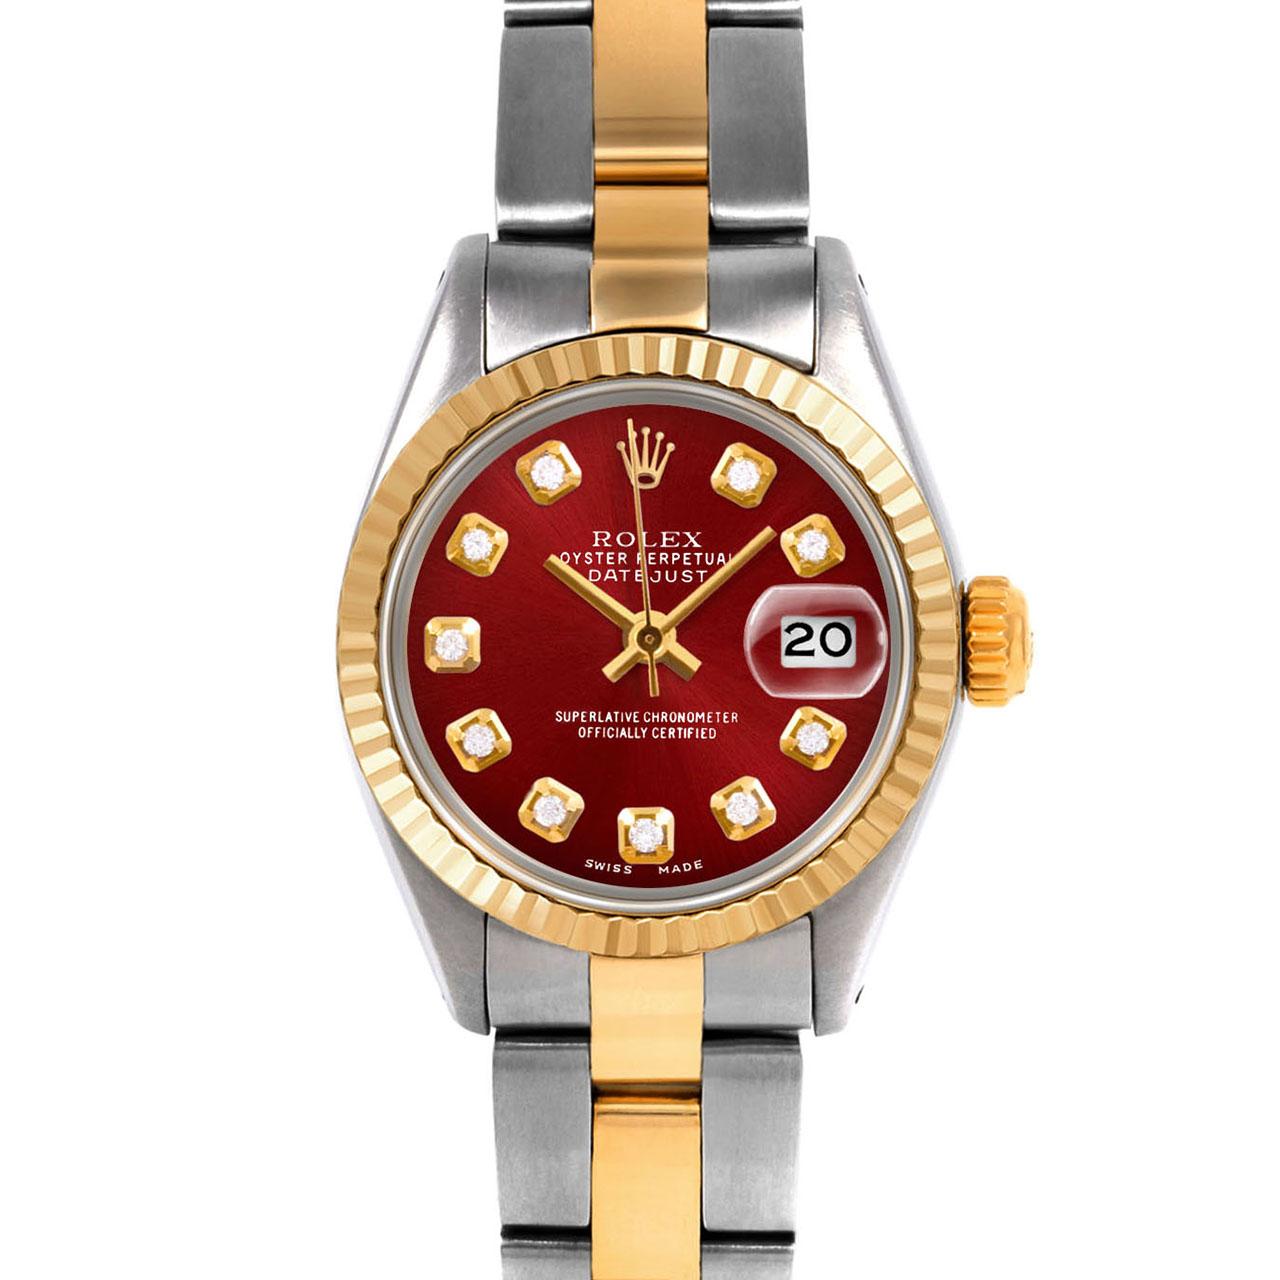 Swiss Wrist - SKU 6917-TT-RED-DIA-AM-FLT-OYS

Brand : Rolex
Model : Datejust (Non-Quickset Model)
Gender : Ladies
Metals : 14K/Stainless Steel
Case Size : 26 mm

Dial : Custom Red Diamond Dial (This dial is not original Rolex And has been added